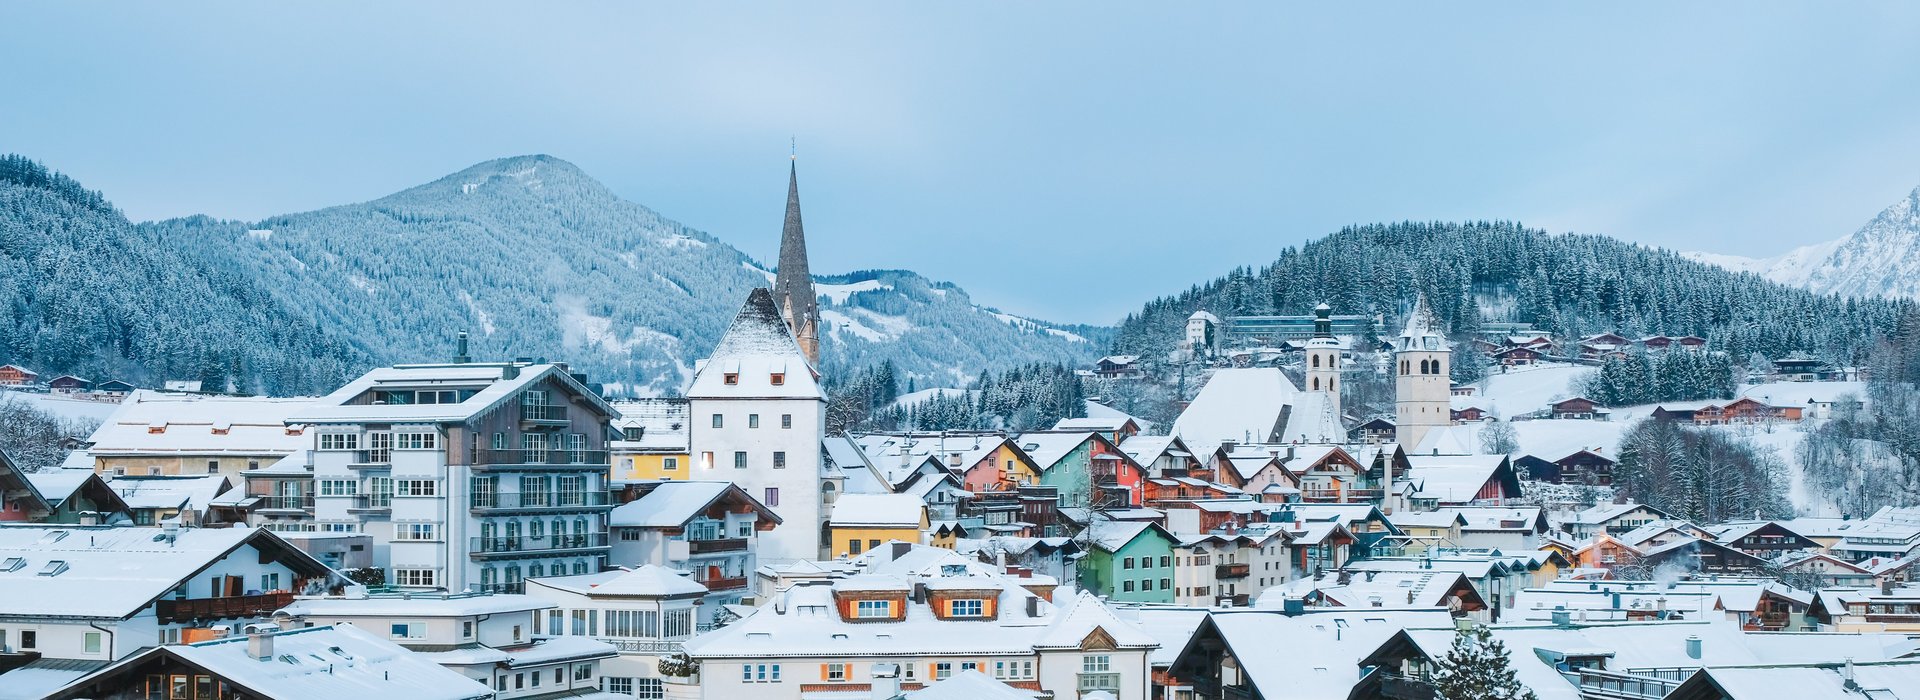 View of the snowy houses and roofs of Kitzbühel  